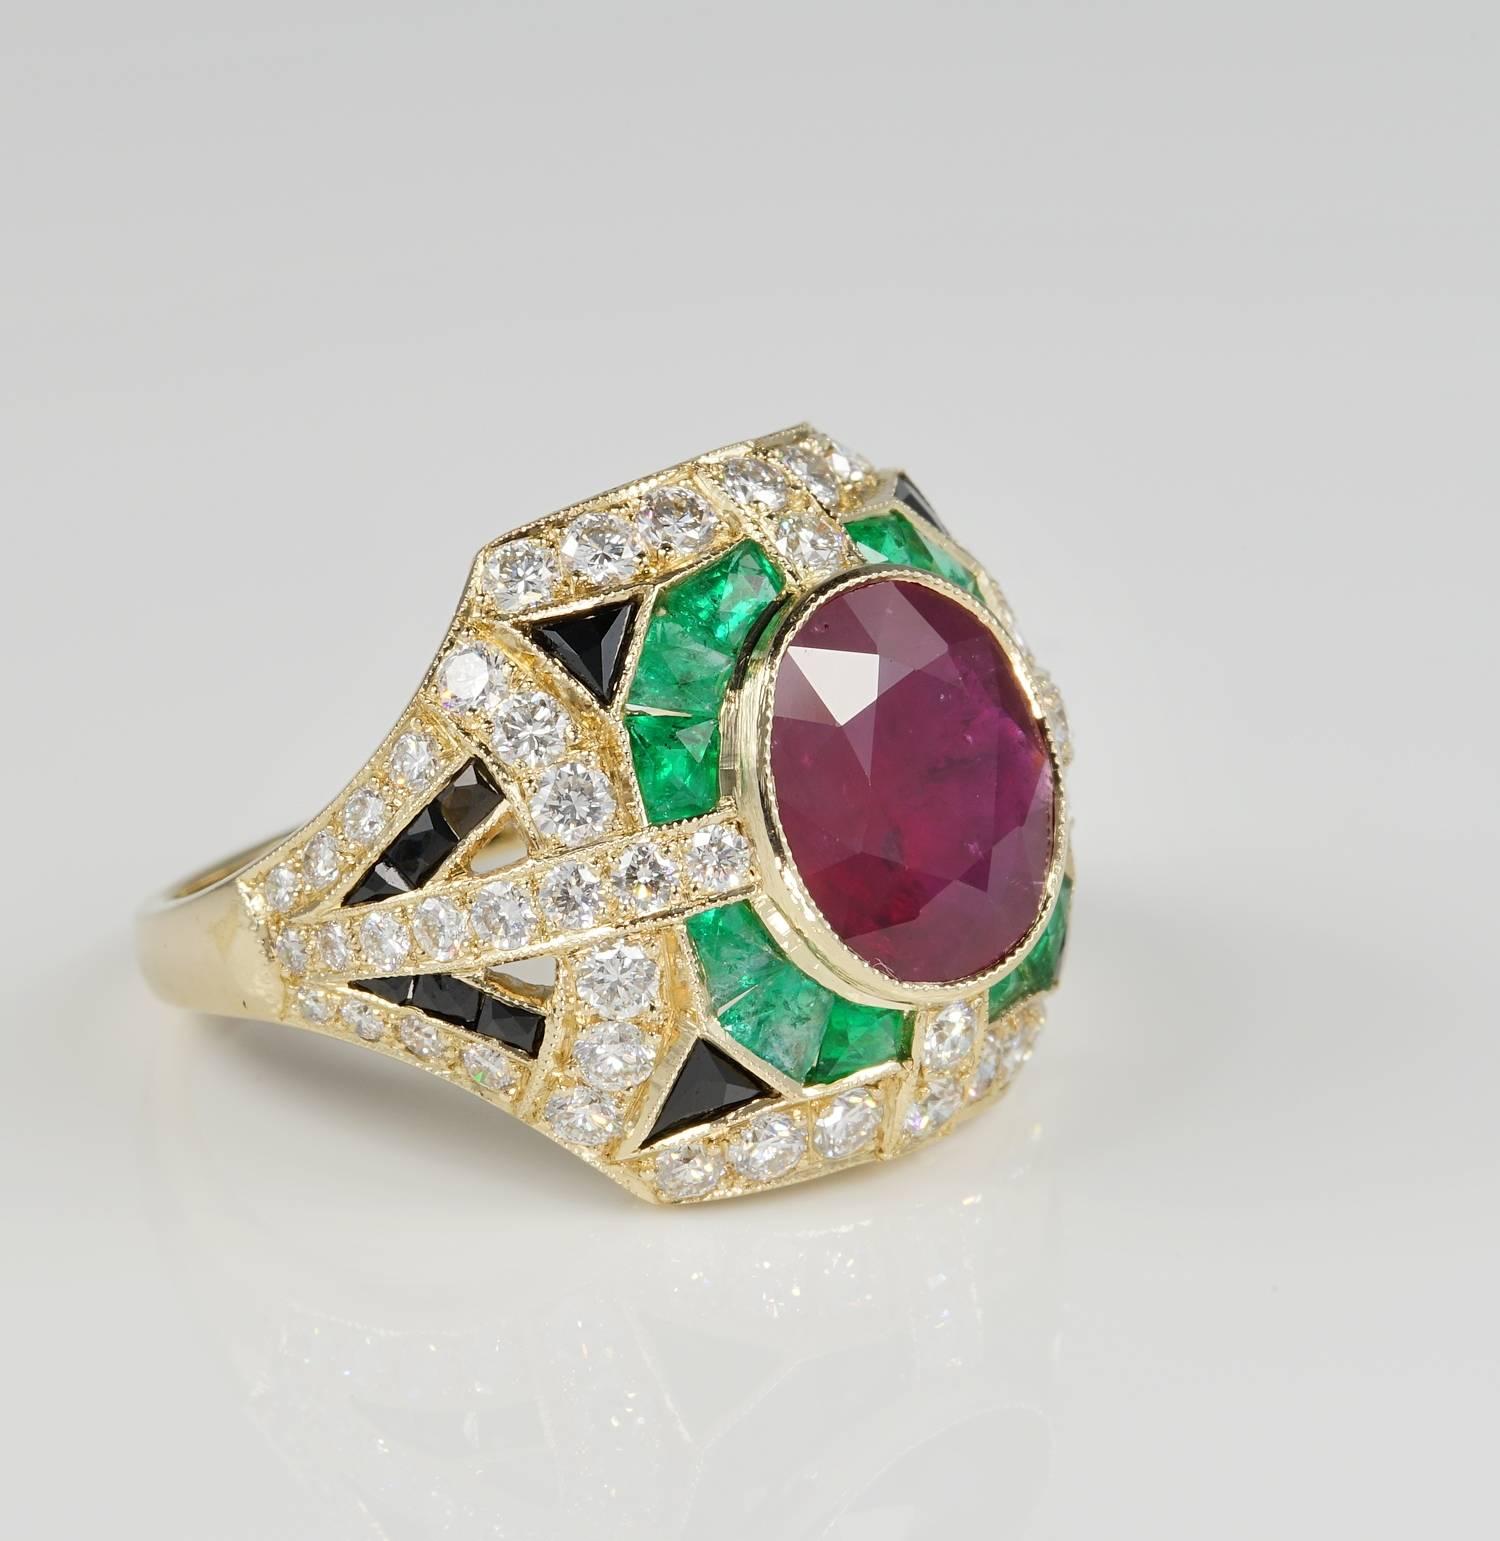 Impressive and colourful, unique design made as a mosaic of natural gemstones attracting the attention for the captivating motifs
Centring a large natural Ruby of intense plum red colour – heat treated – being 2.90 Ct. in weight looking even bigger